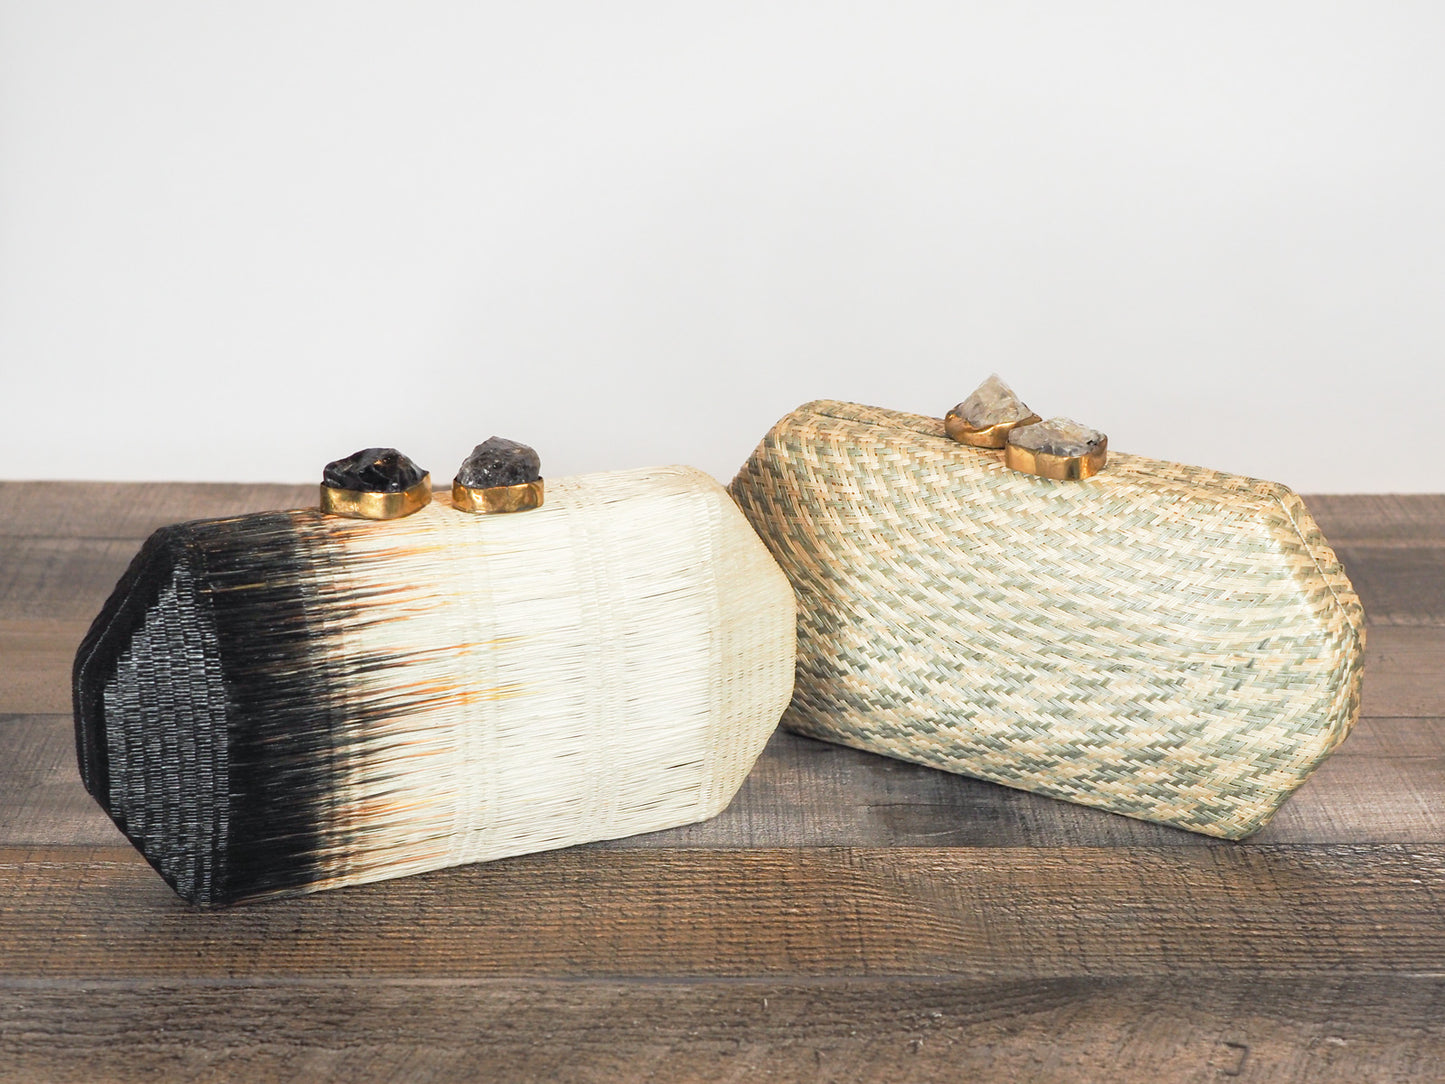 Handloomed clutch made from natural plant fibers carefully extracted from the stalks of the tropical buri palm in the Philippines and finished with a beautiful quartz stone closure. - Shown with another buri clutch